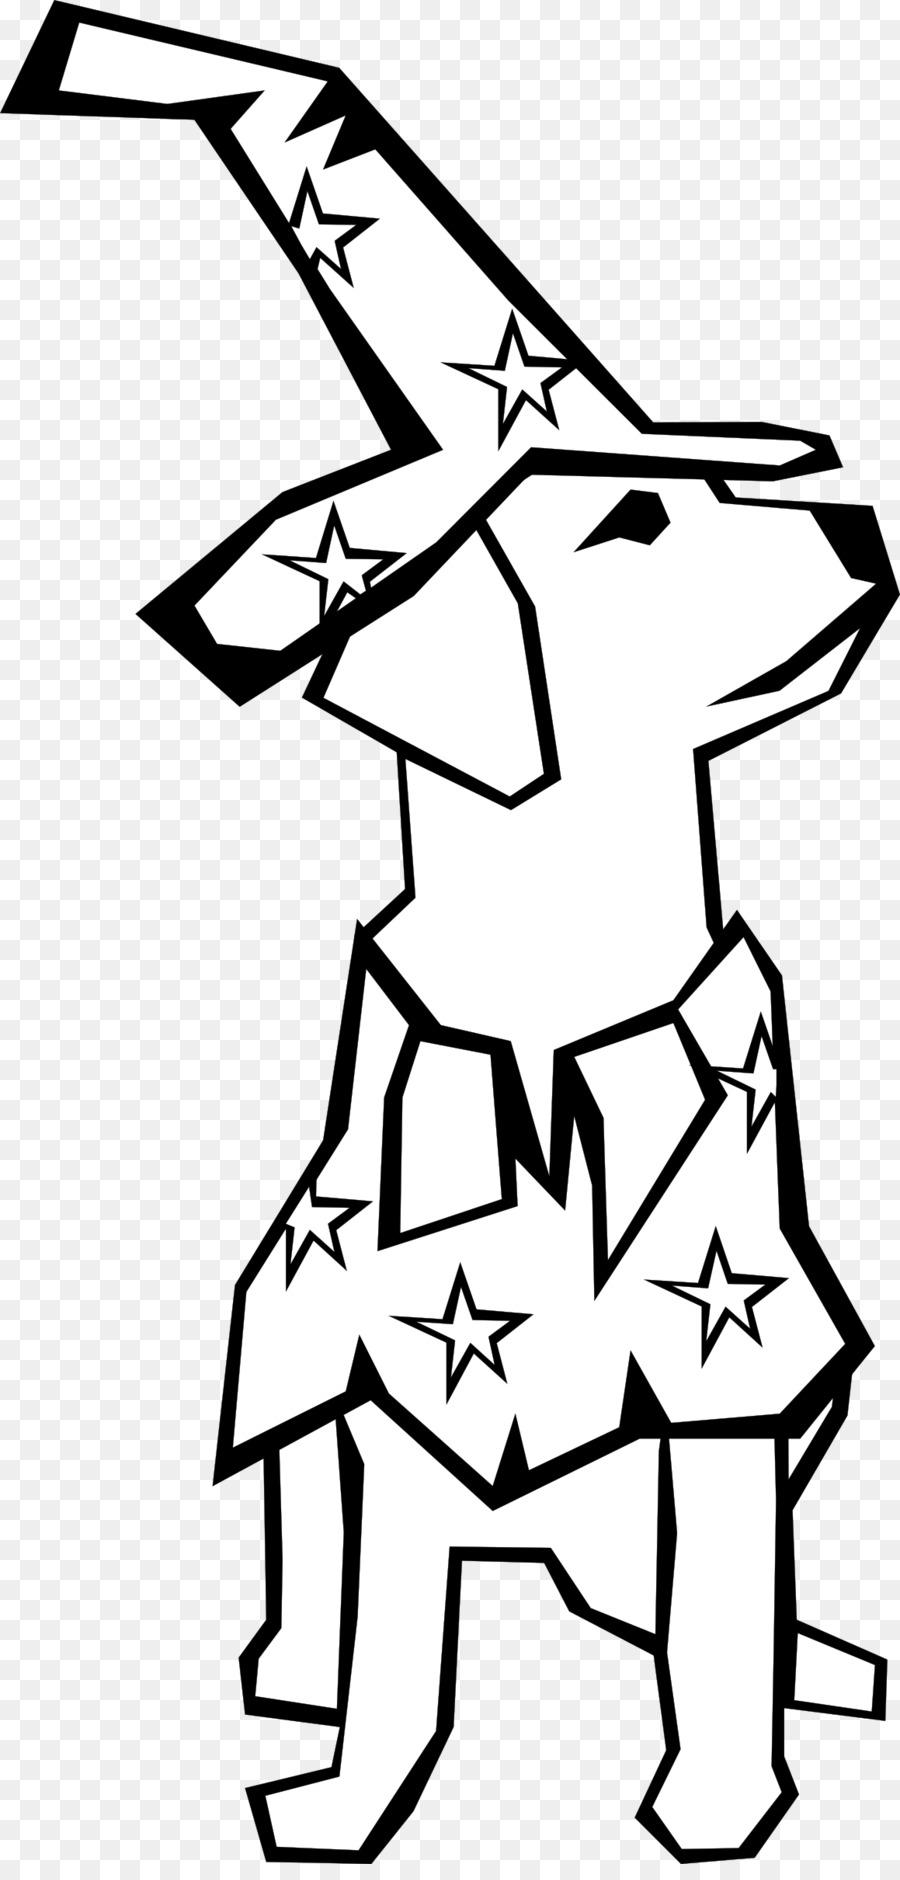 Dog drawing clipart.